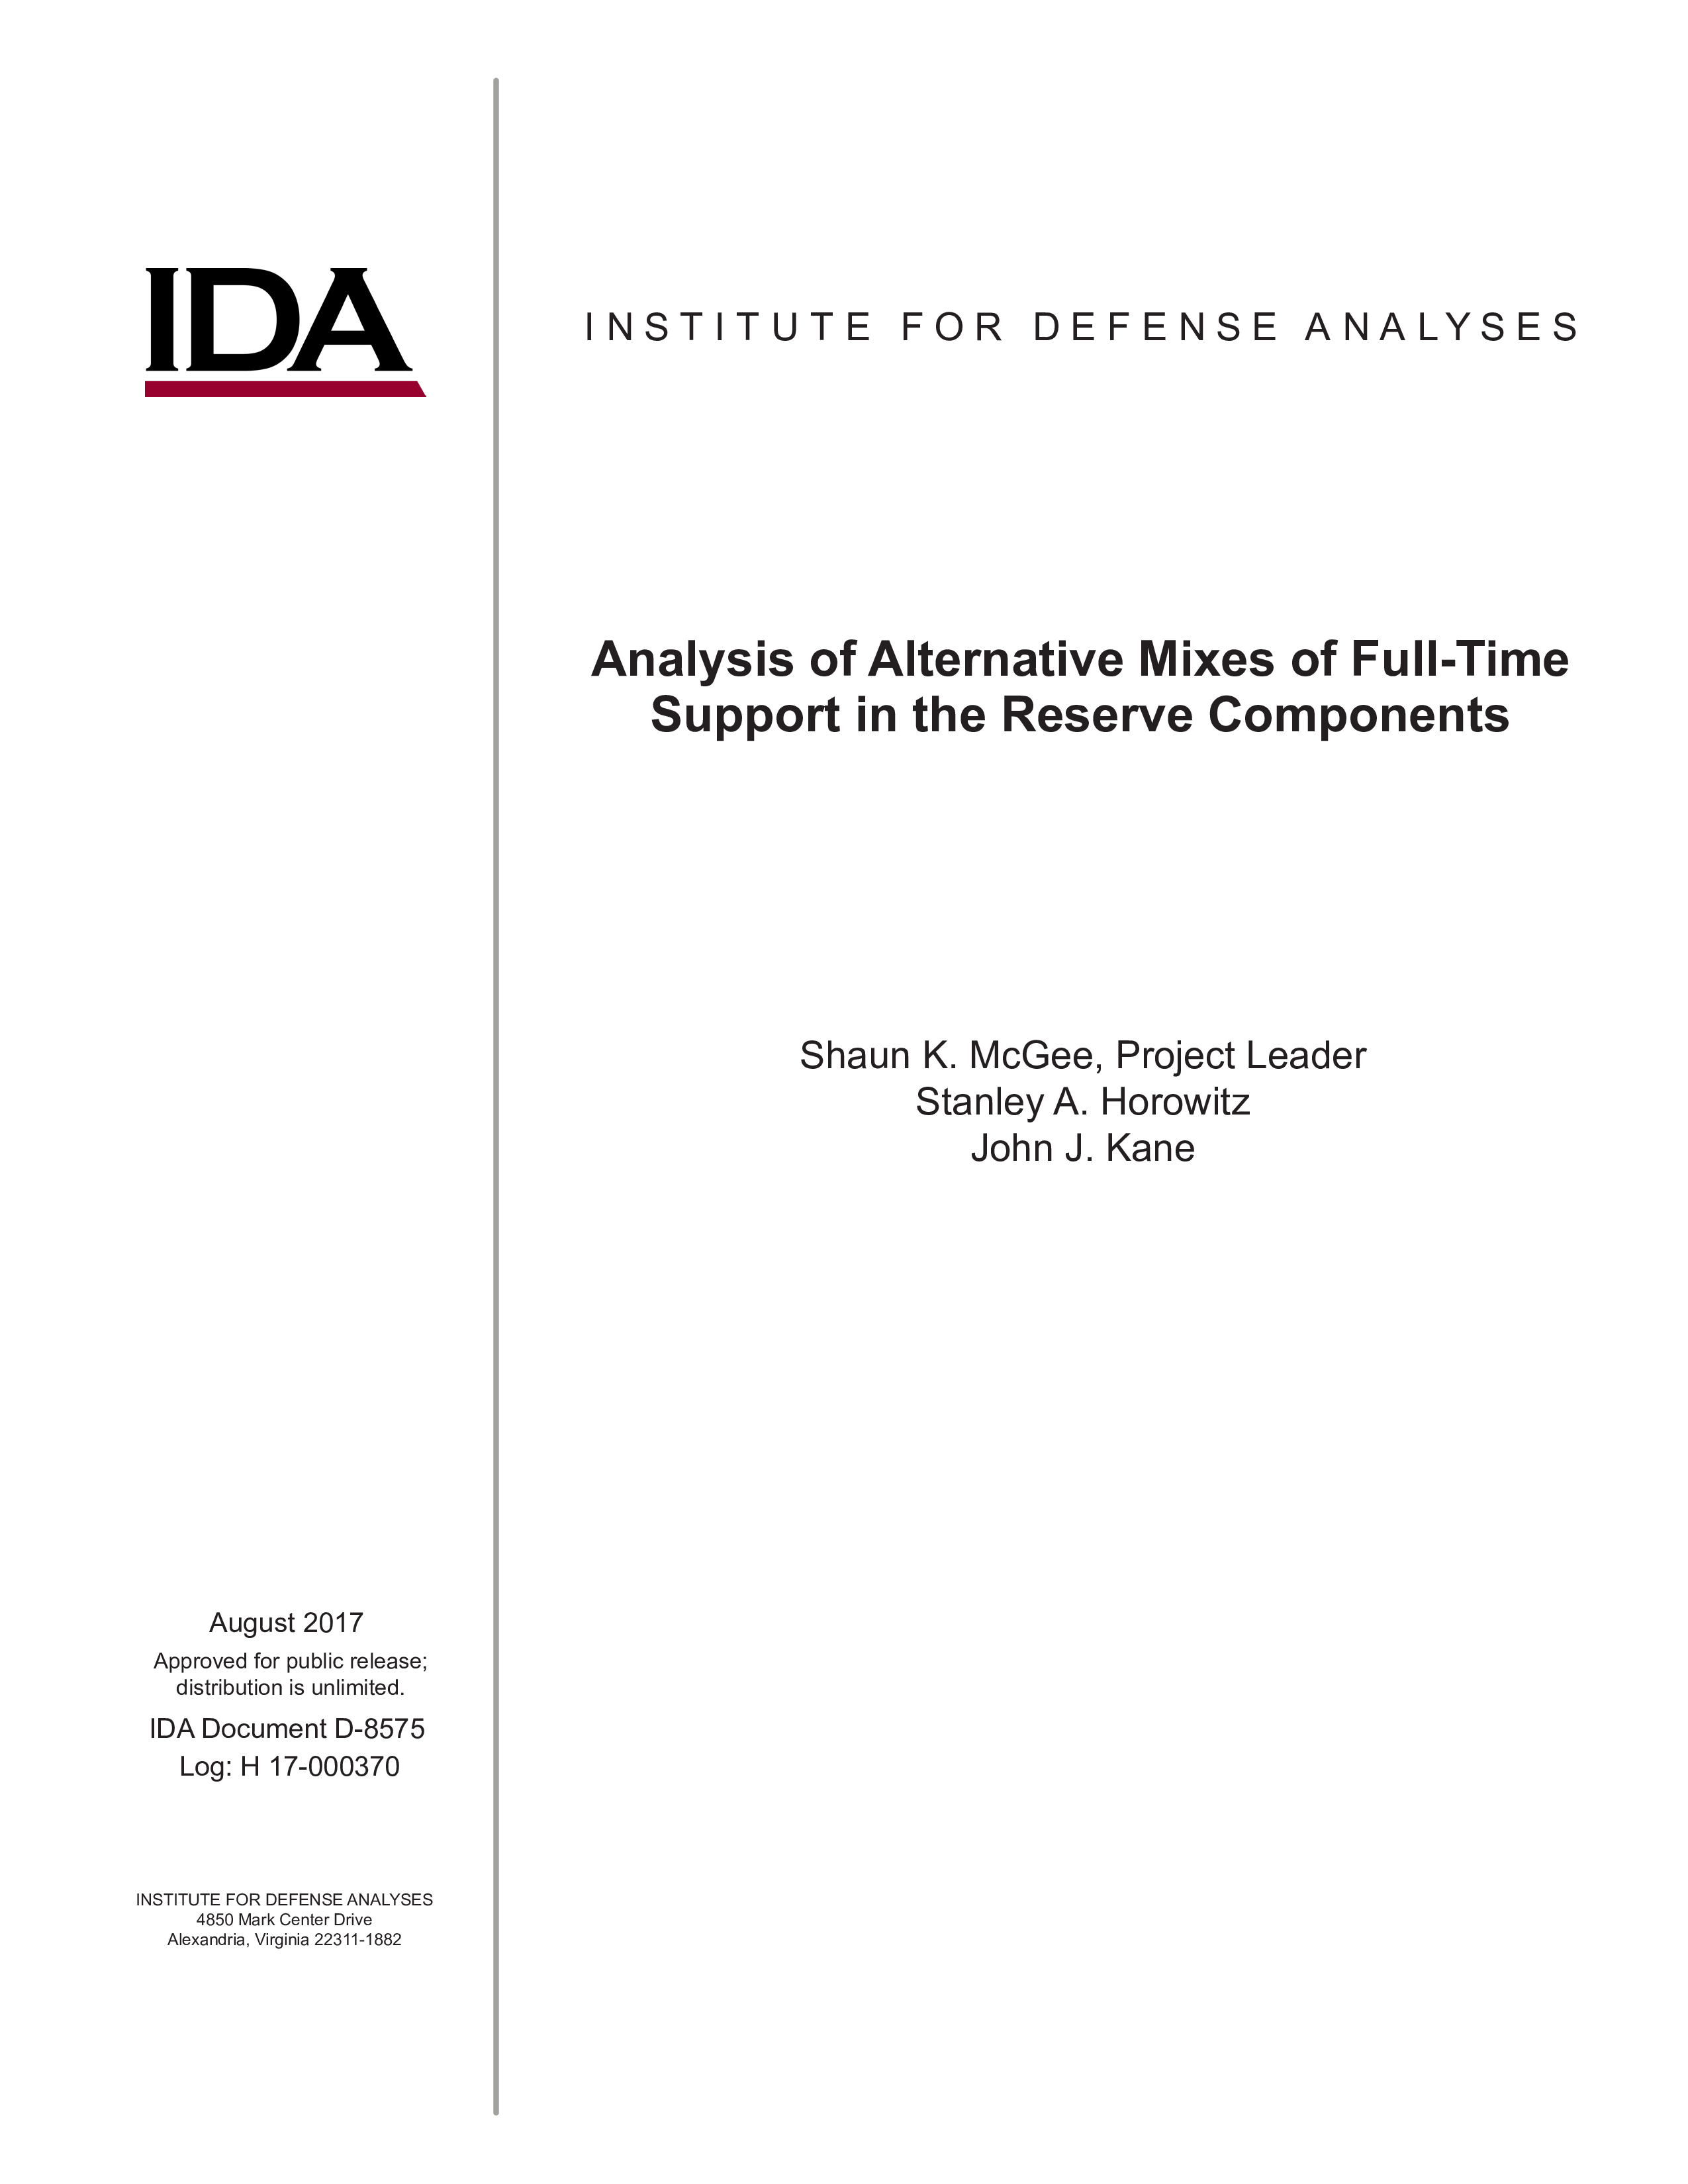 Analysis of Alternative Mixes of Full-Time Support in the Reserve Components